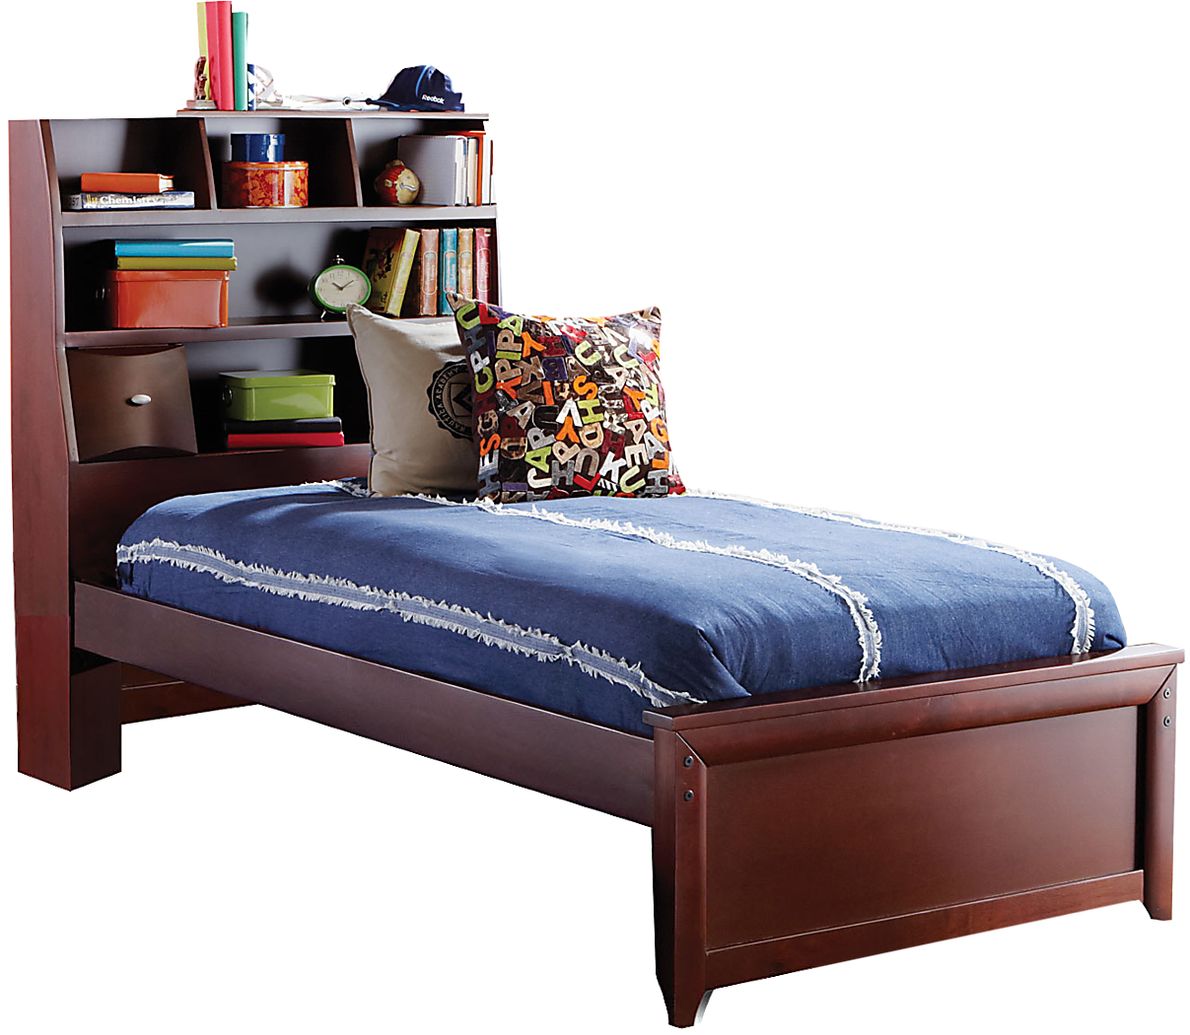 Kids Ivy League Cherry 3 Pc Twin Bookcase Bed